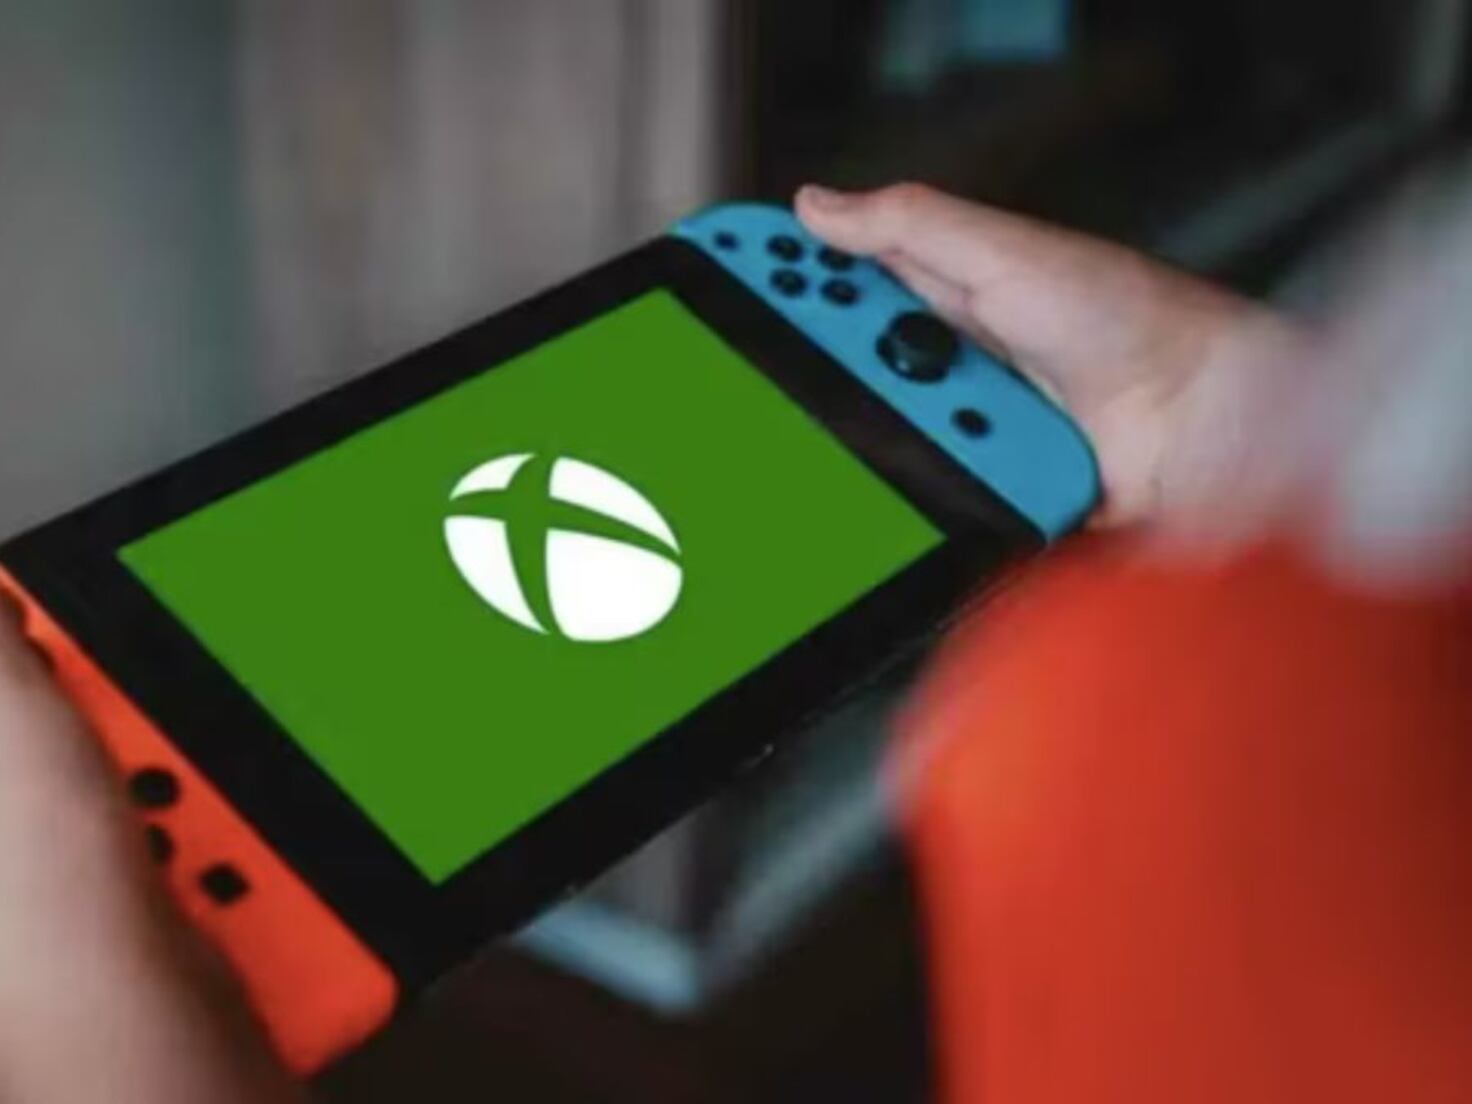 5 Xbox games we'd love to see on Nintendo Switch - Meristation